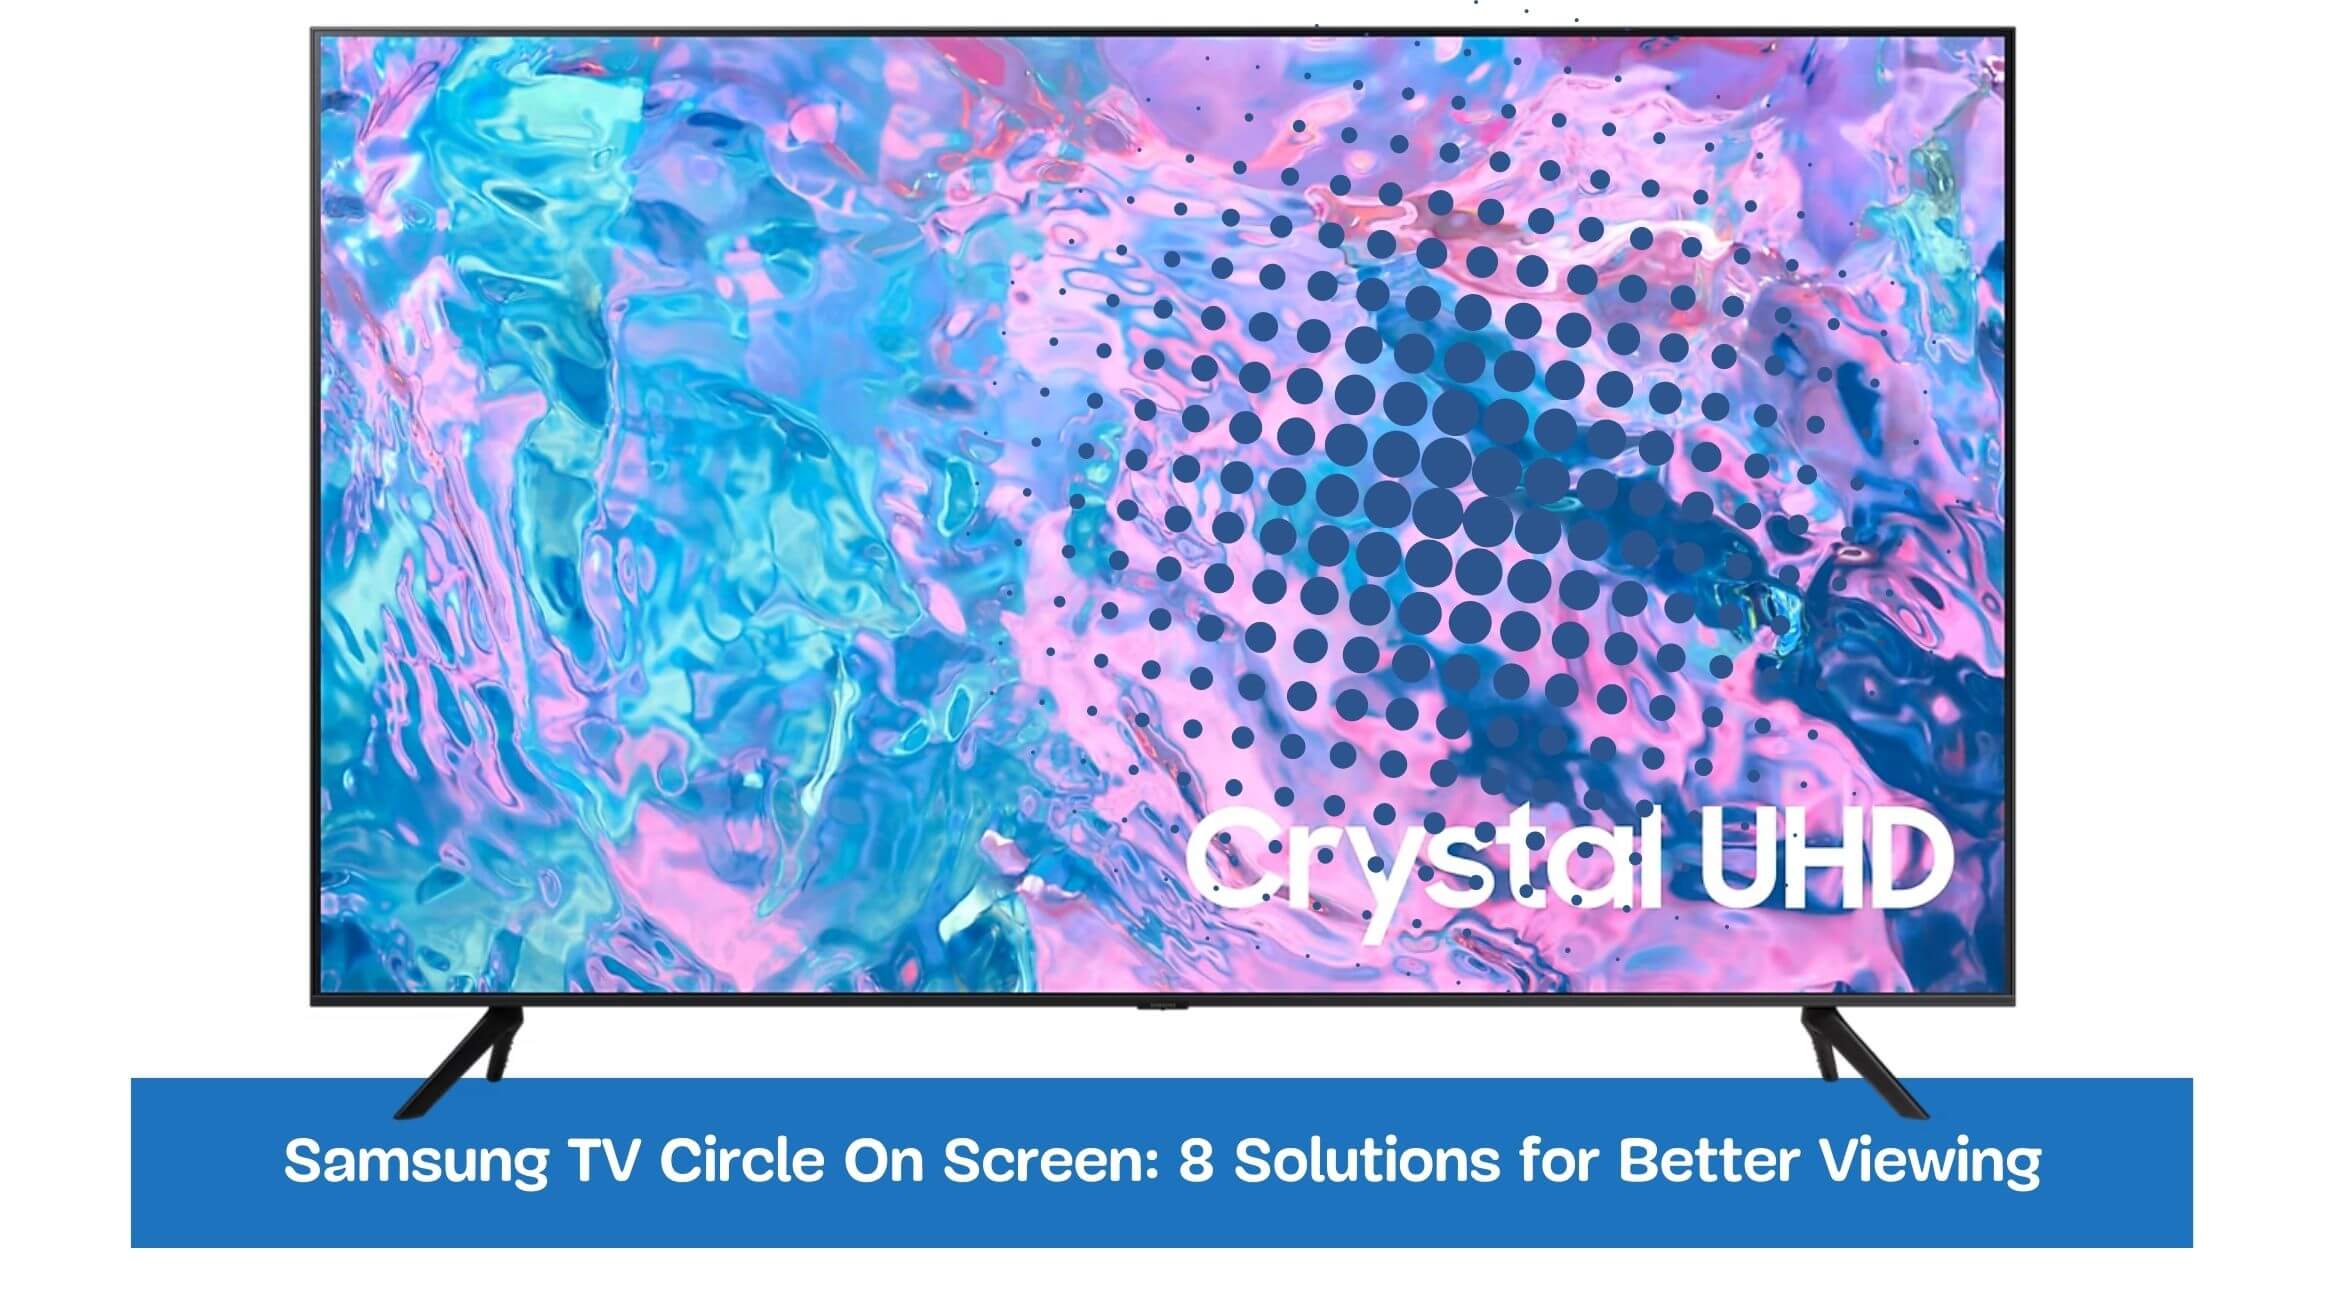 Samsung TV Circle On Screen: 8 Solutions for Better Viewing